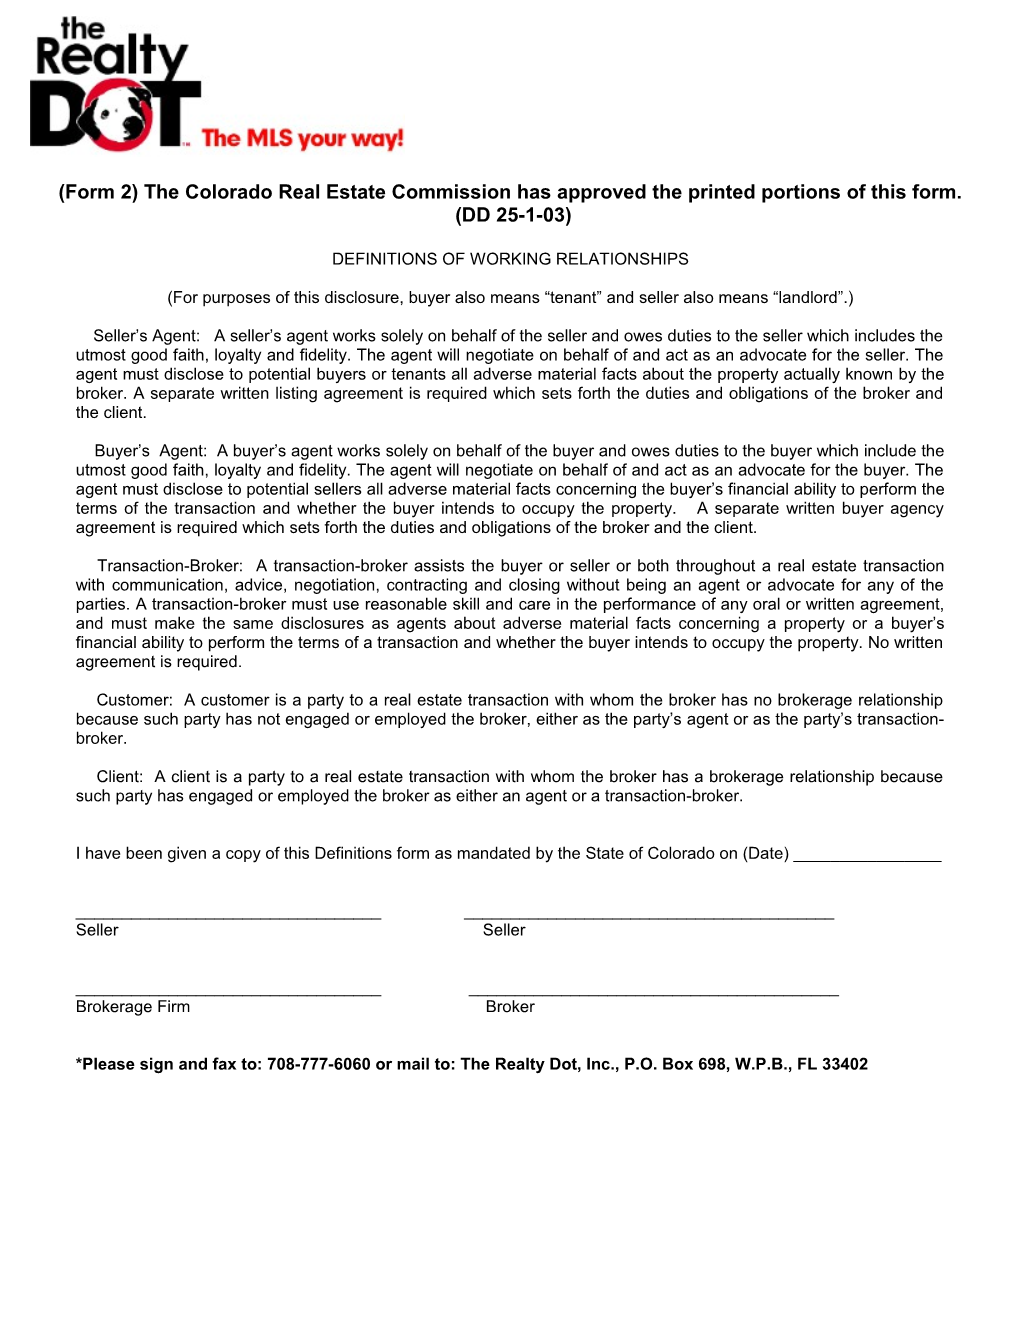 (Form 2) the Colorado Real Estate Commission Has Approved the Printed Portions of This Form